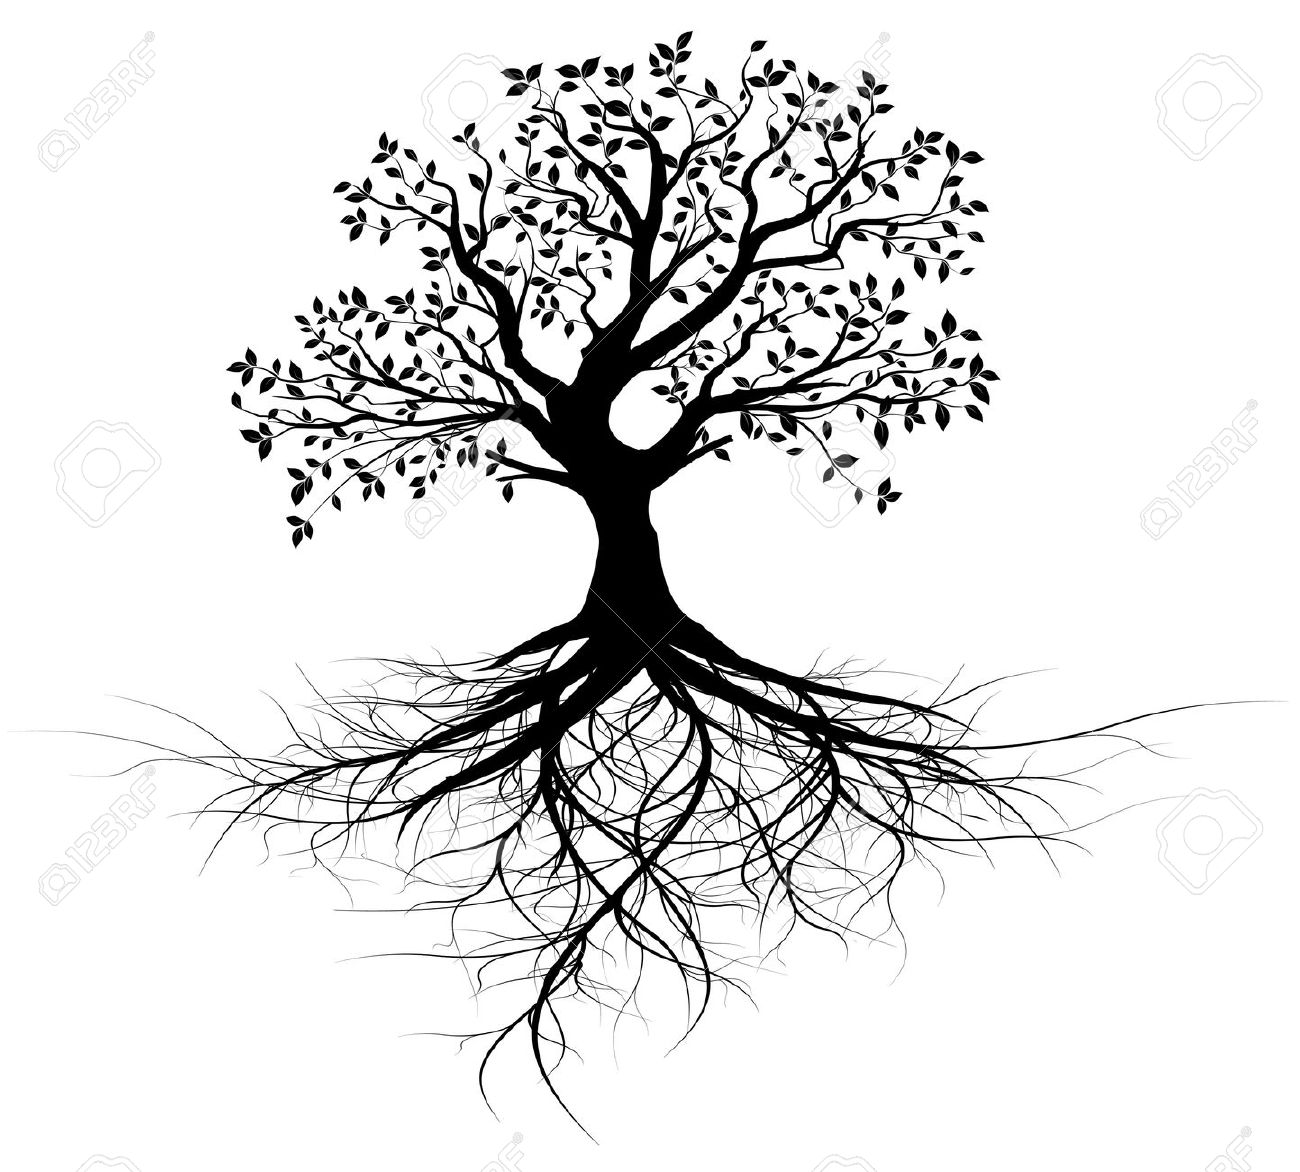 Tree Of Life With Roots Clipart.